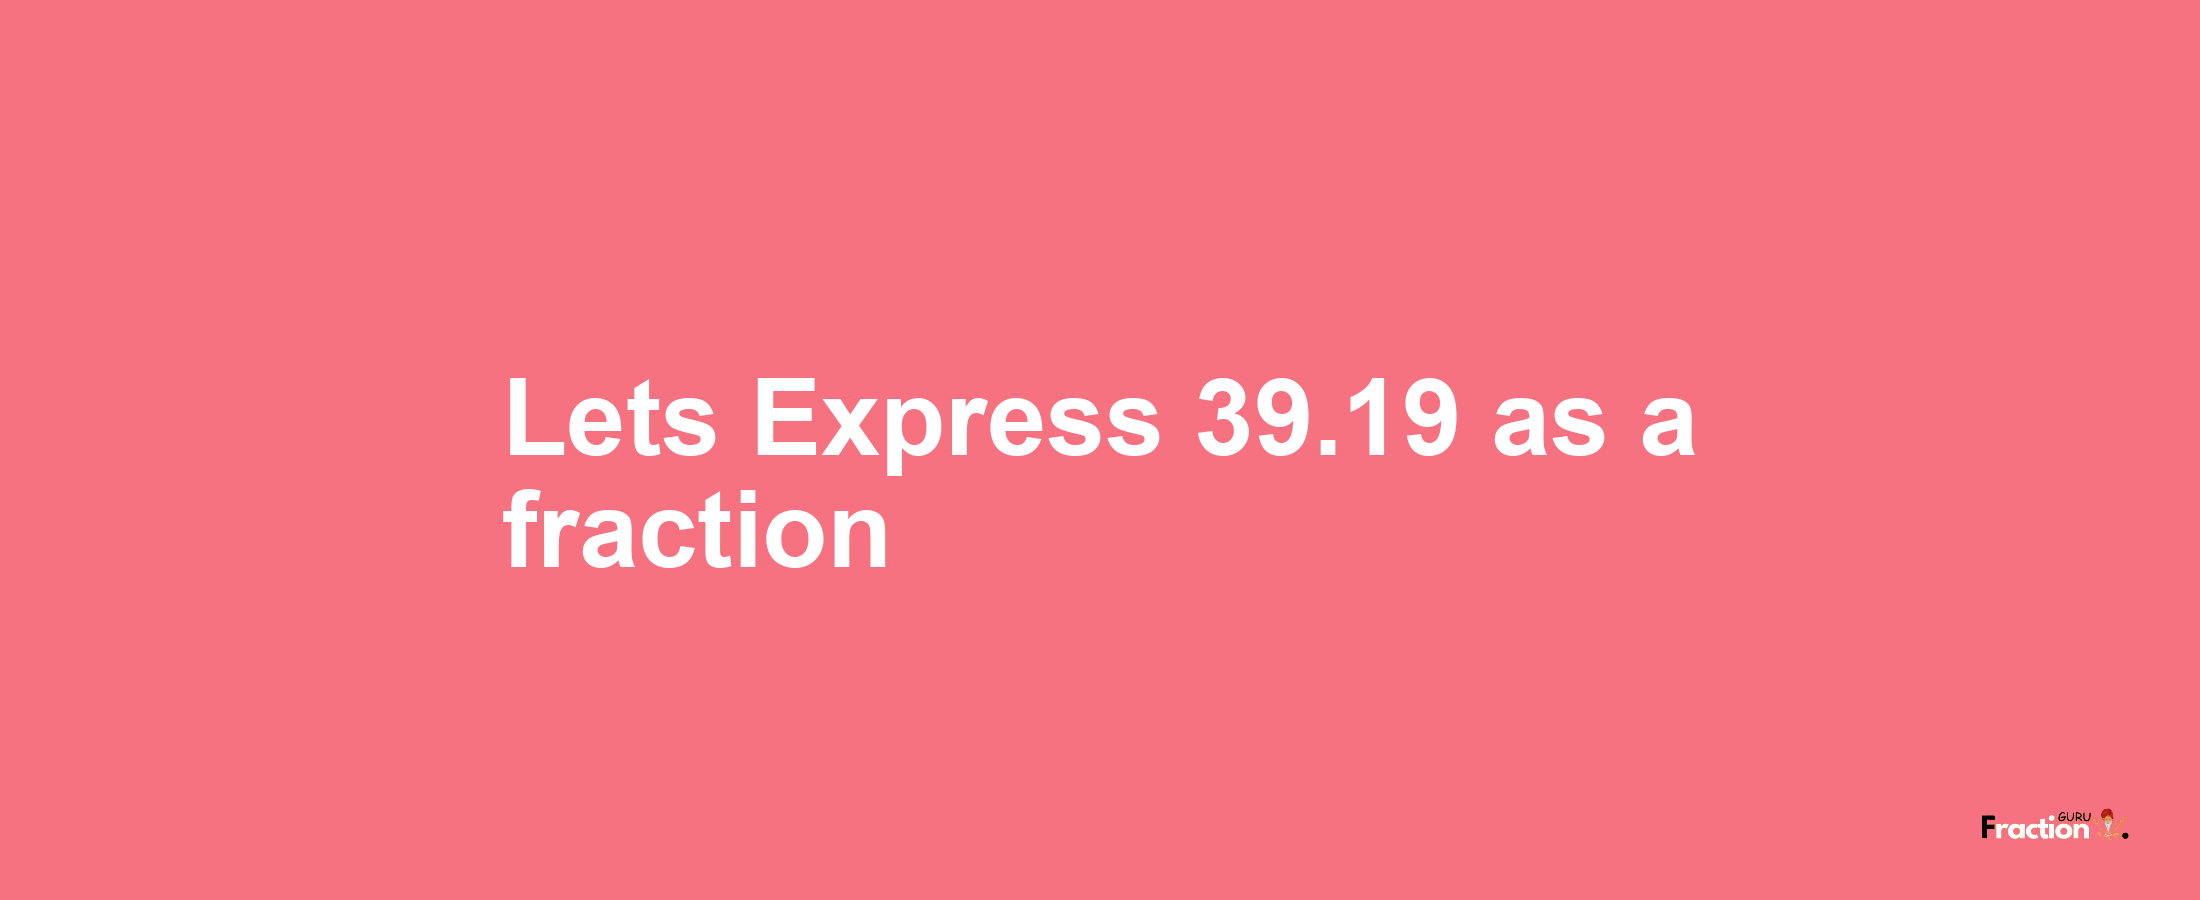 Lets Express 39.19 as afraction